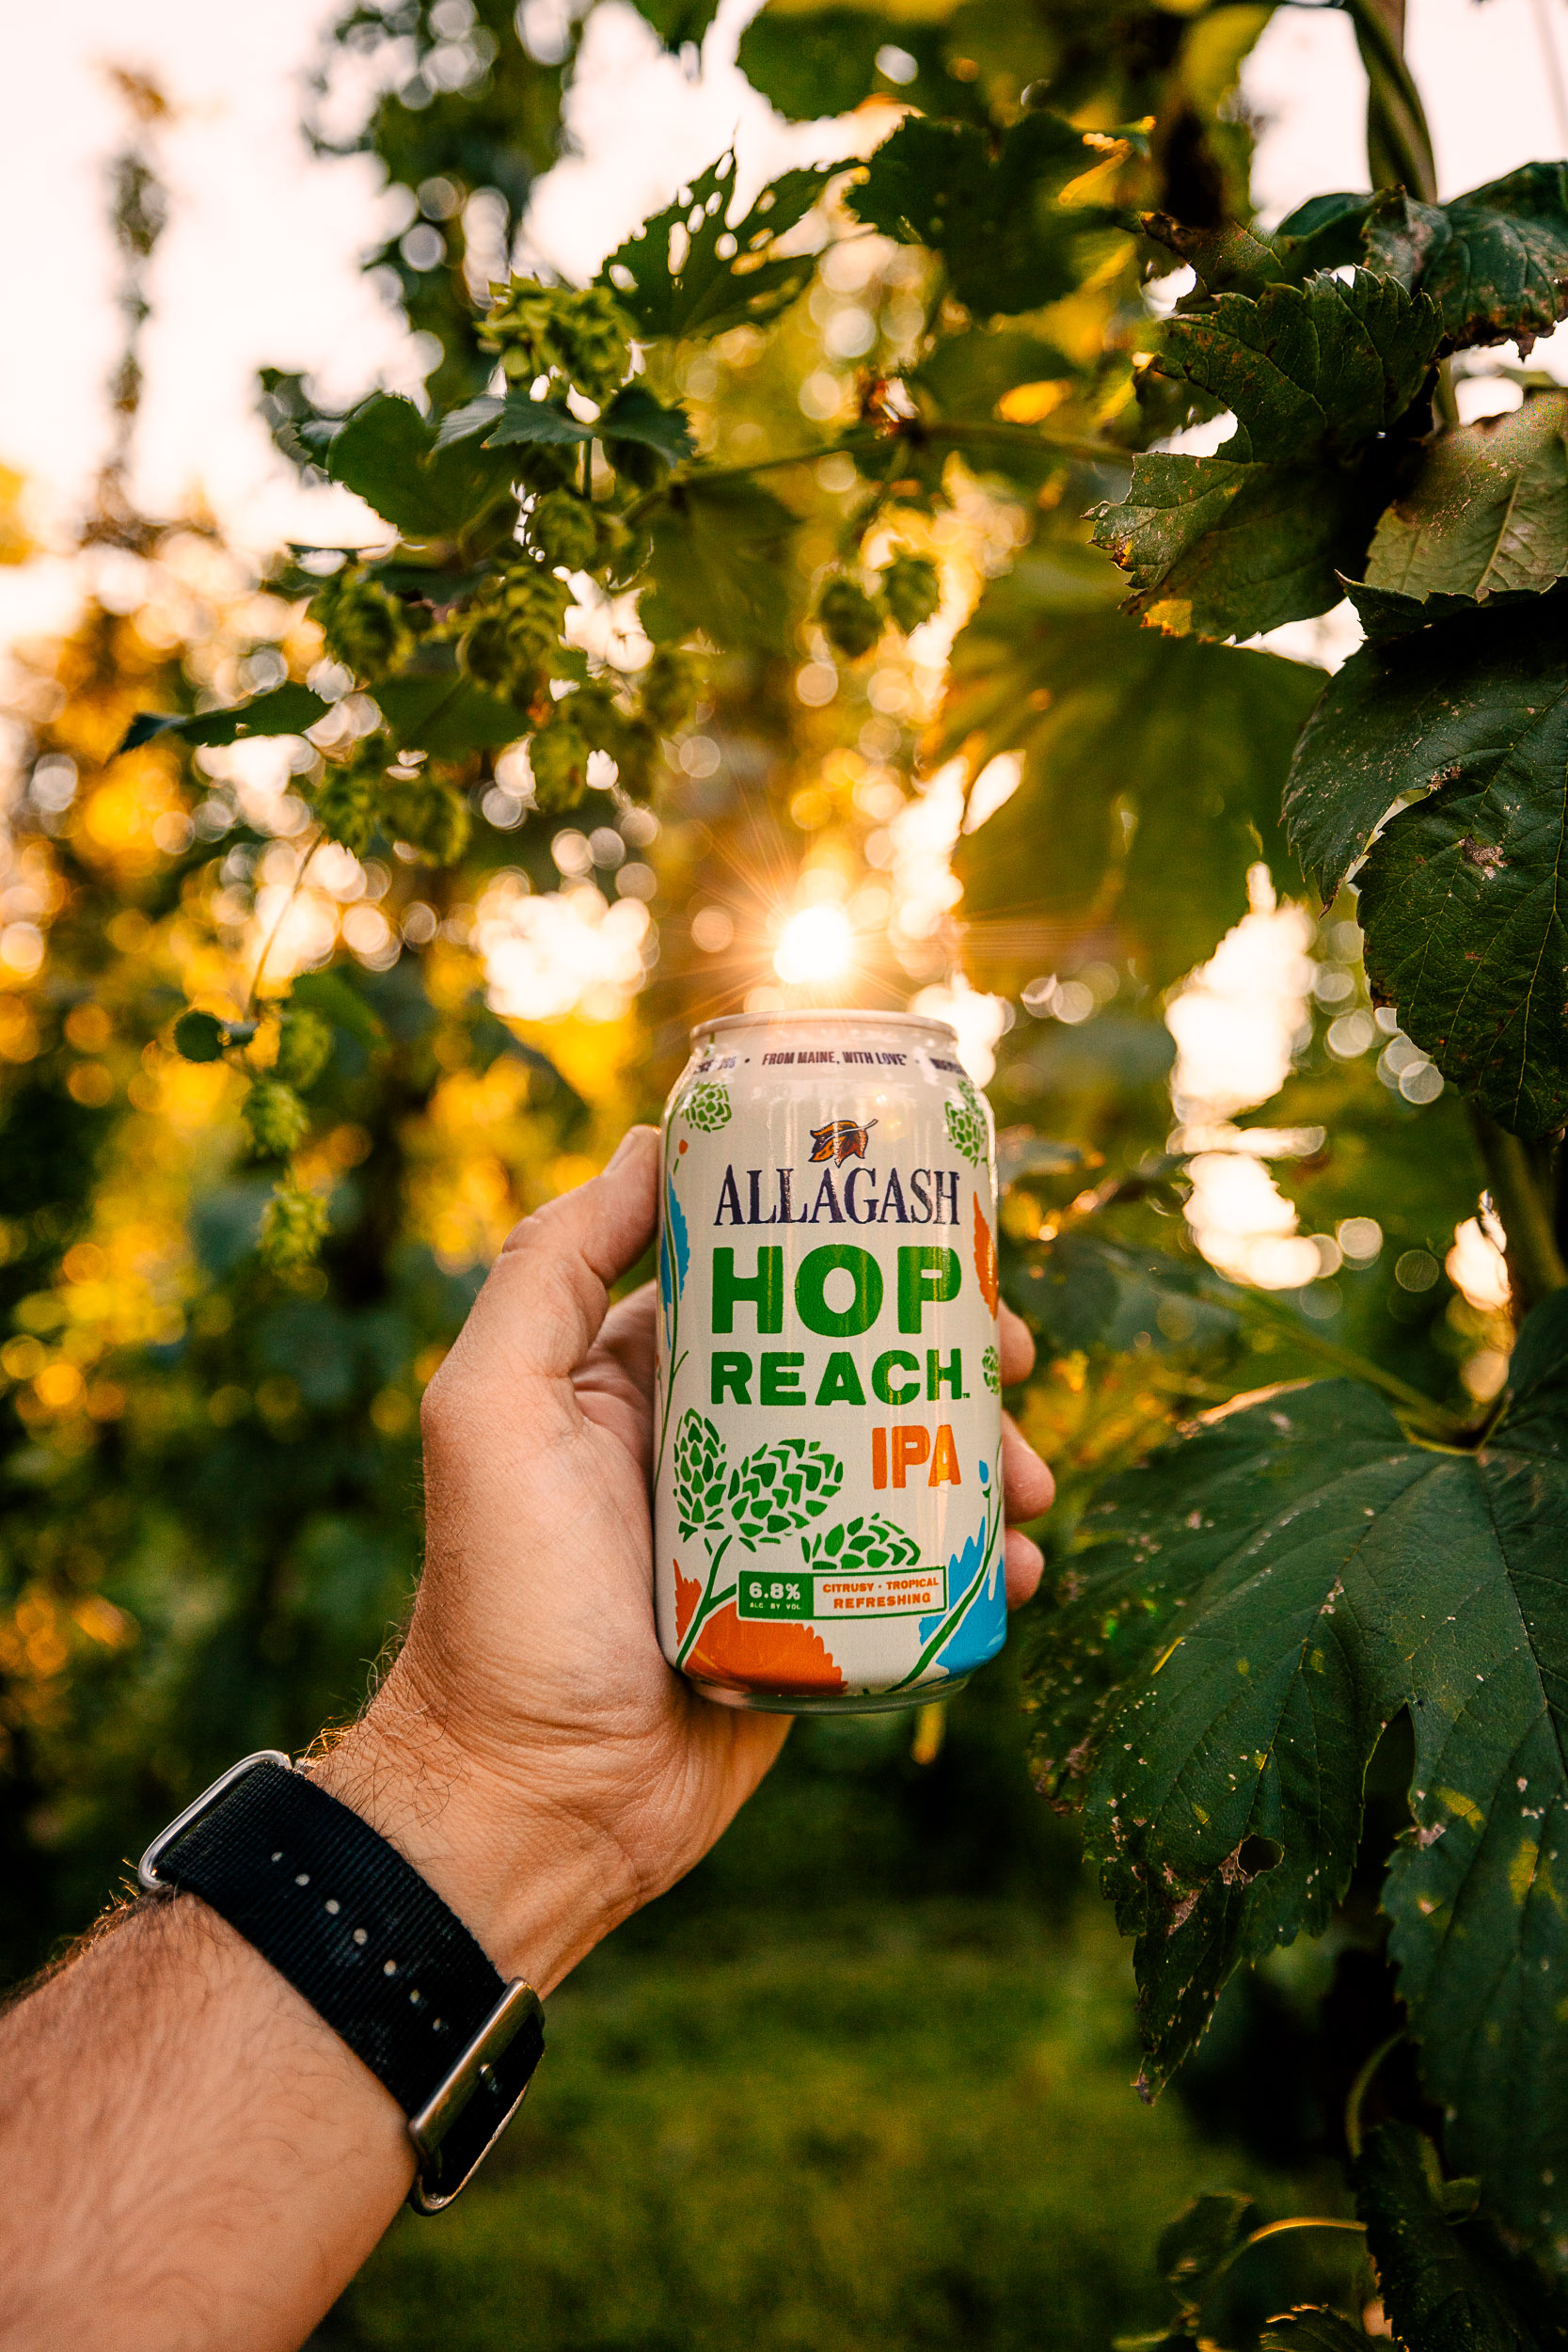 Holding a can of Allagash Hop Reach IPA